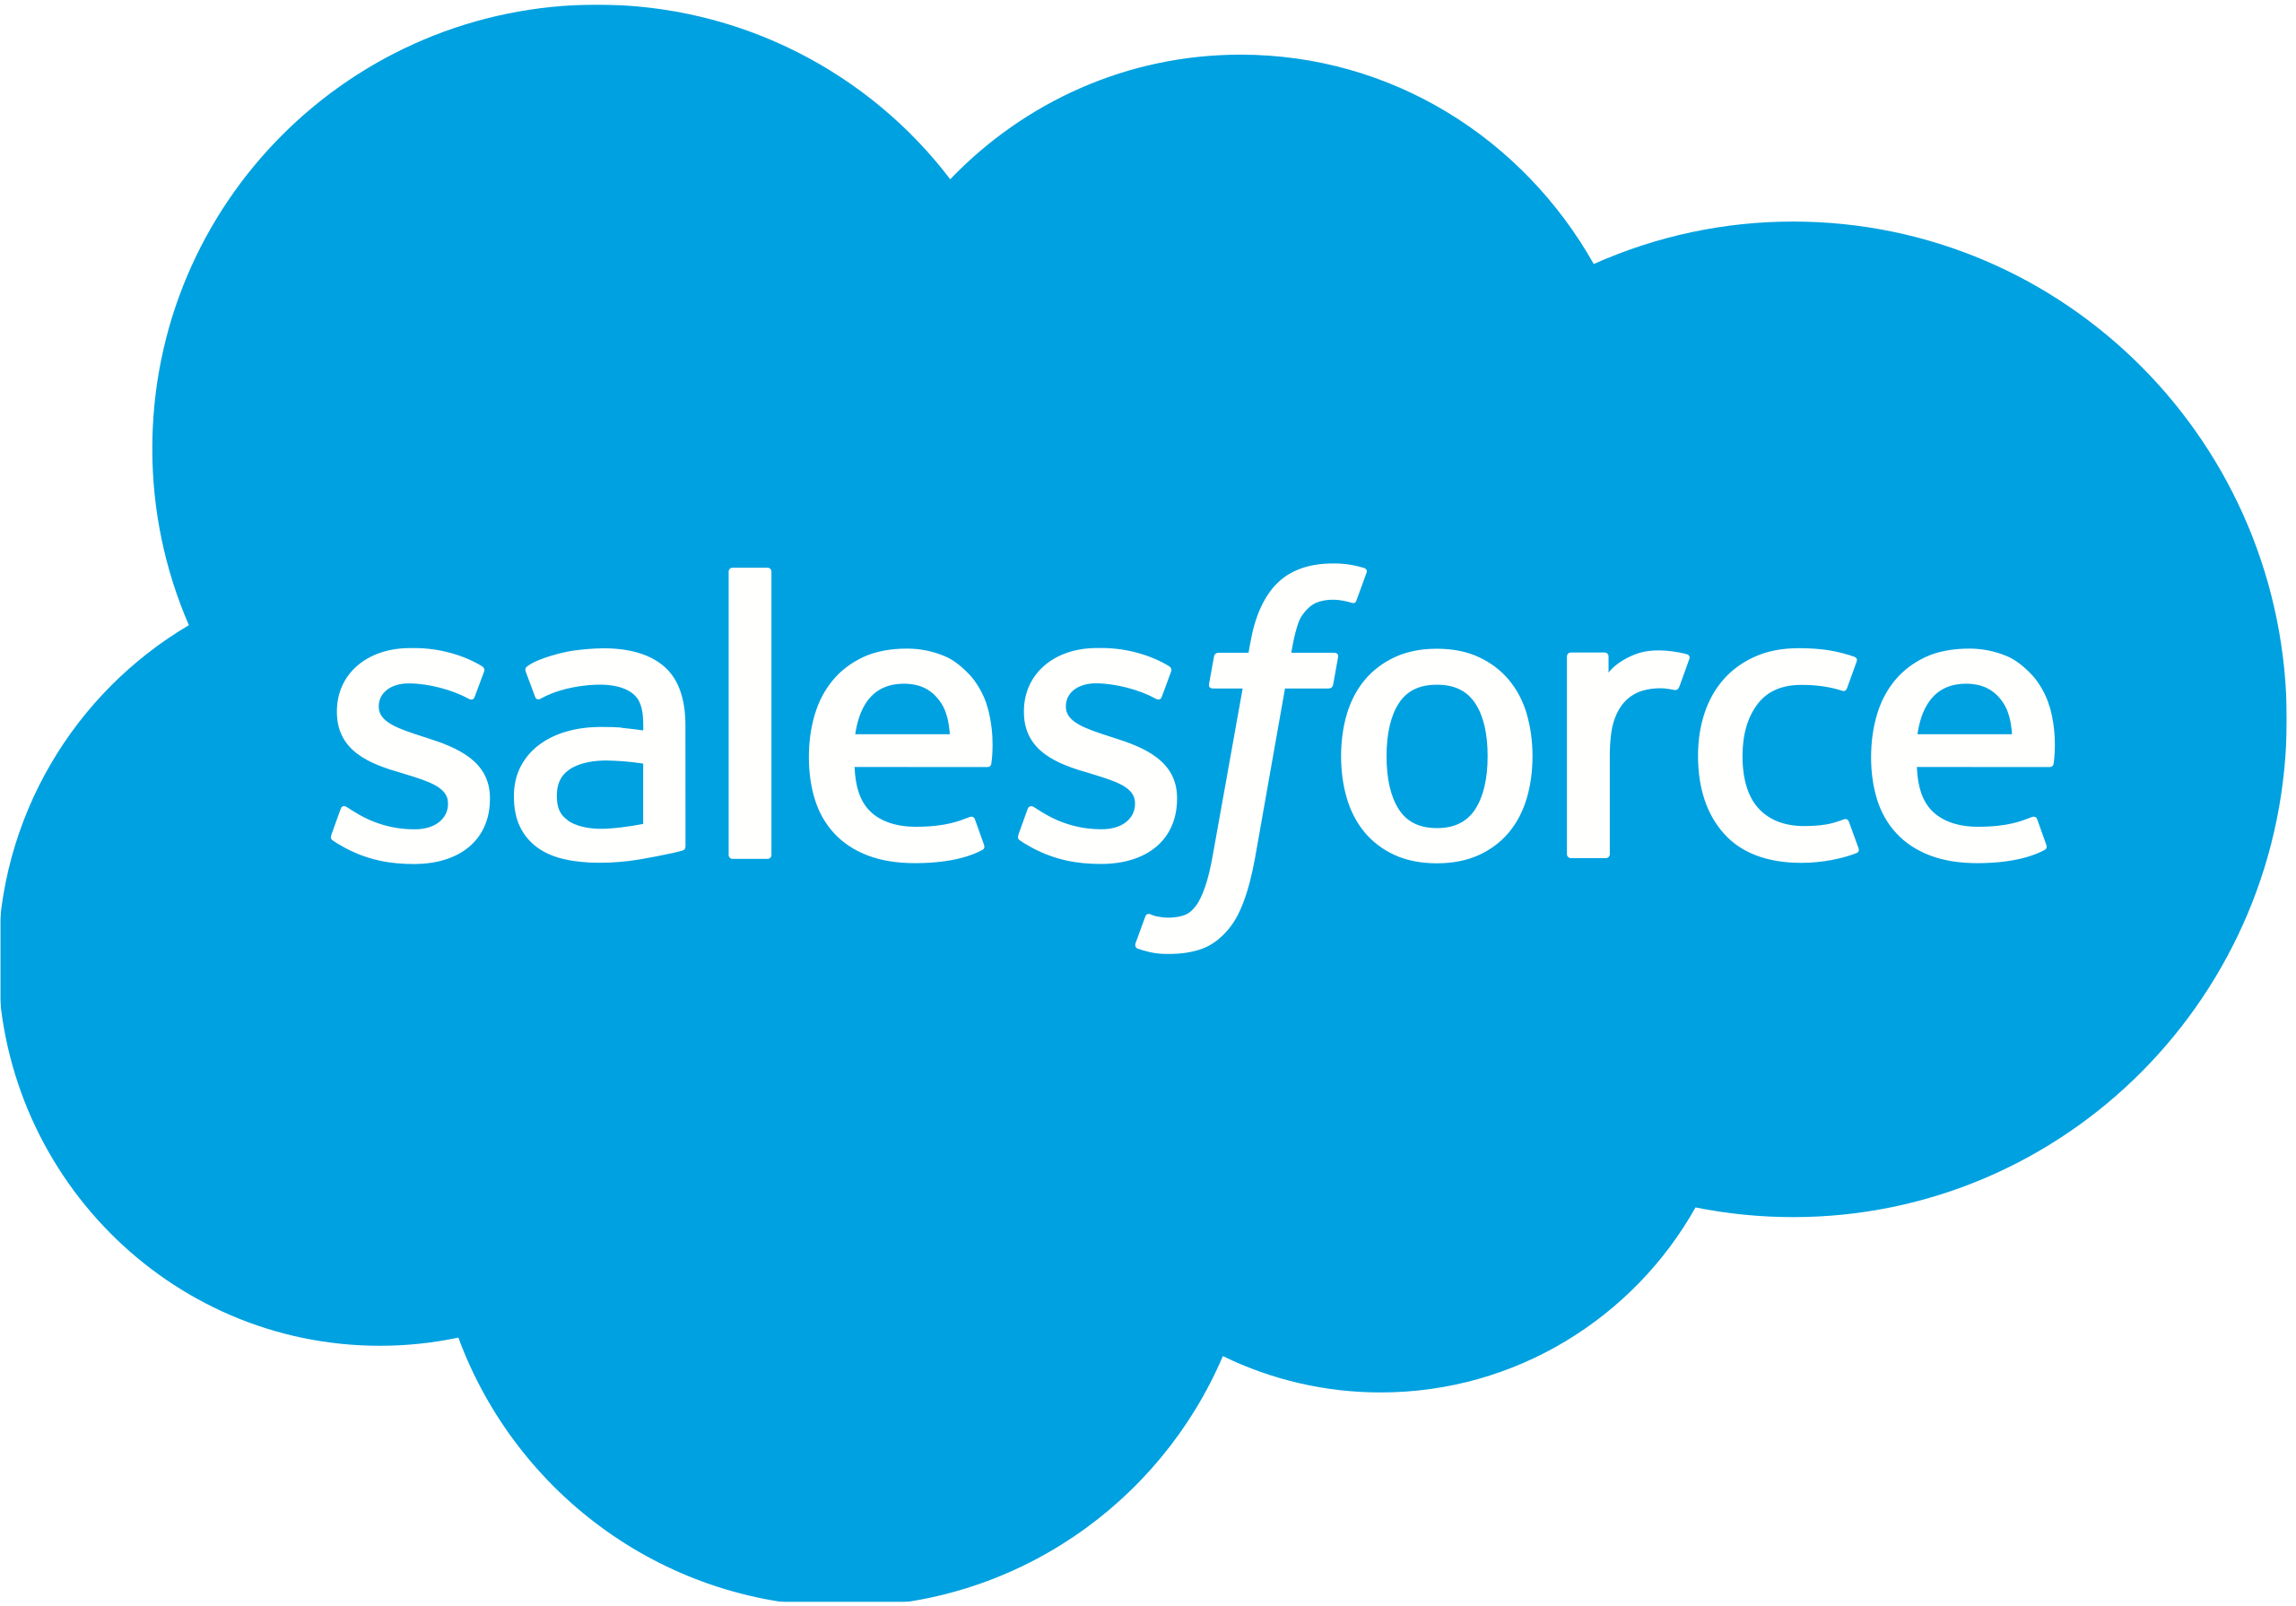 Salesforce logo in white text on blue cloud background